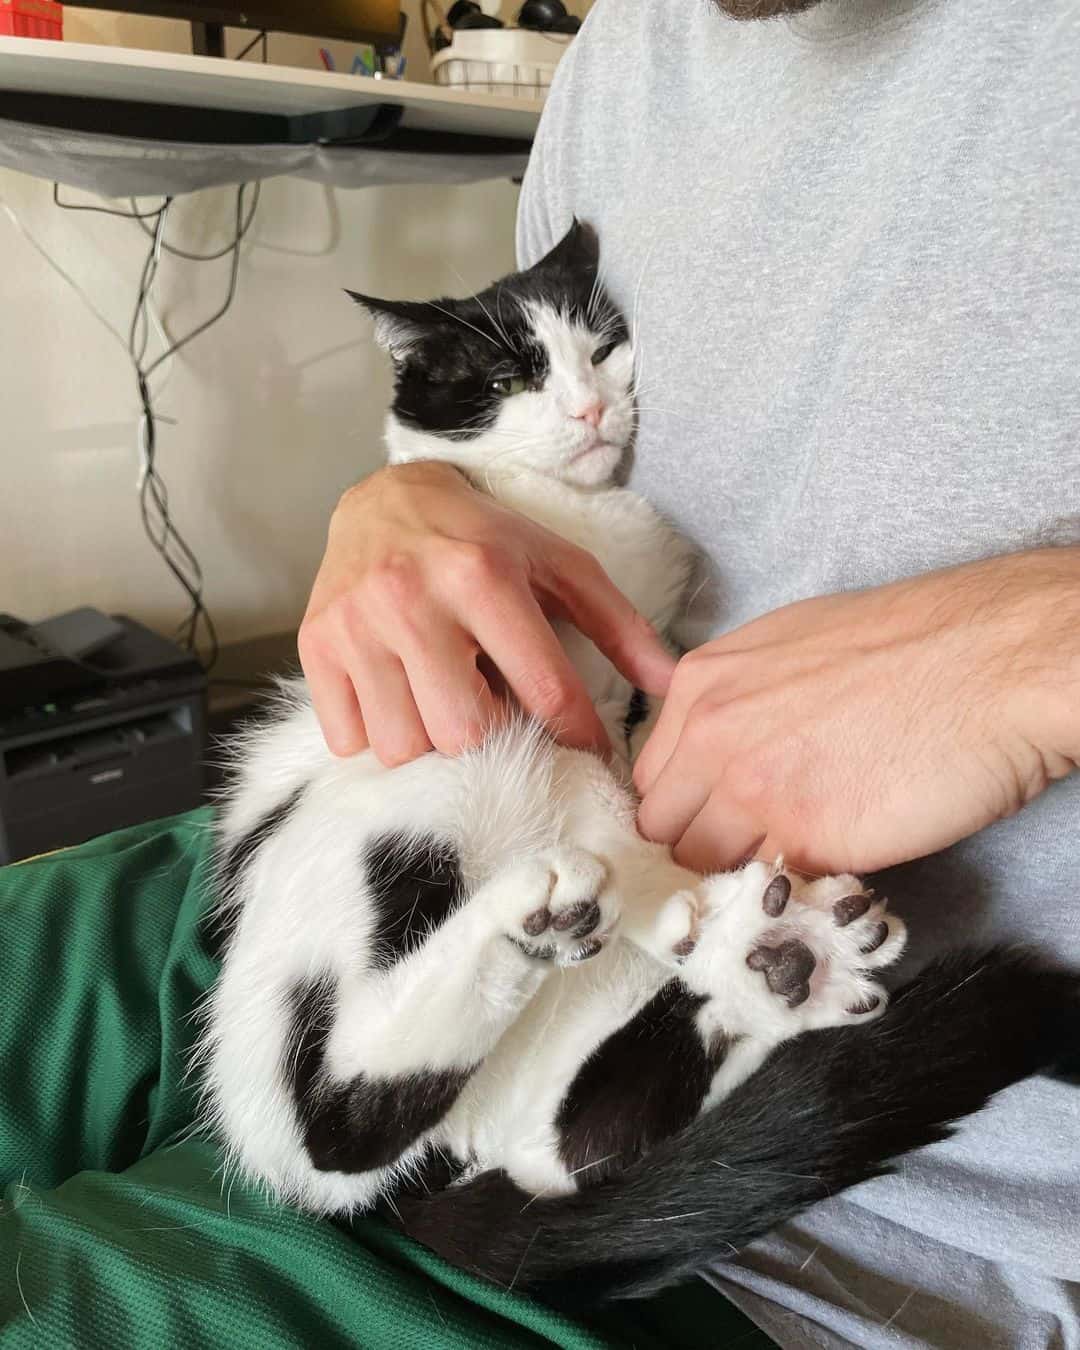 nugget resting in owner's arms